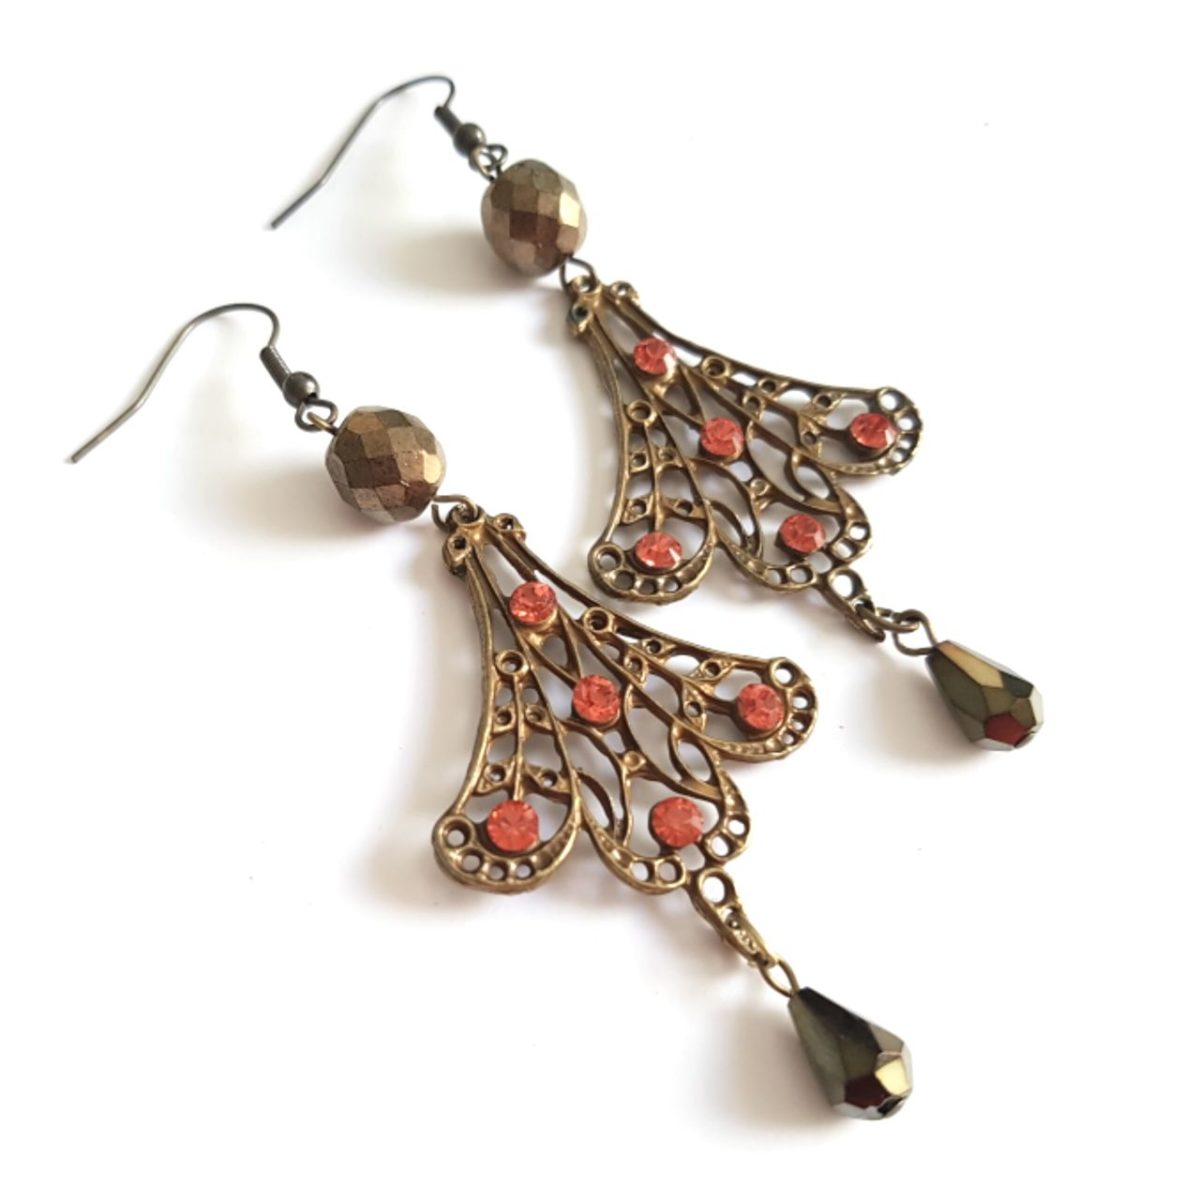 Femme Luxe Earrings Fluted Drop Swarovski Crystal Padparadscha